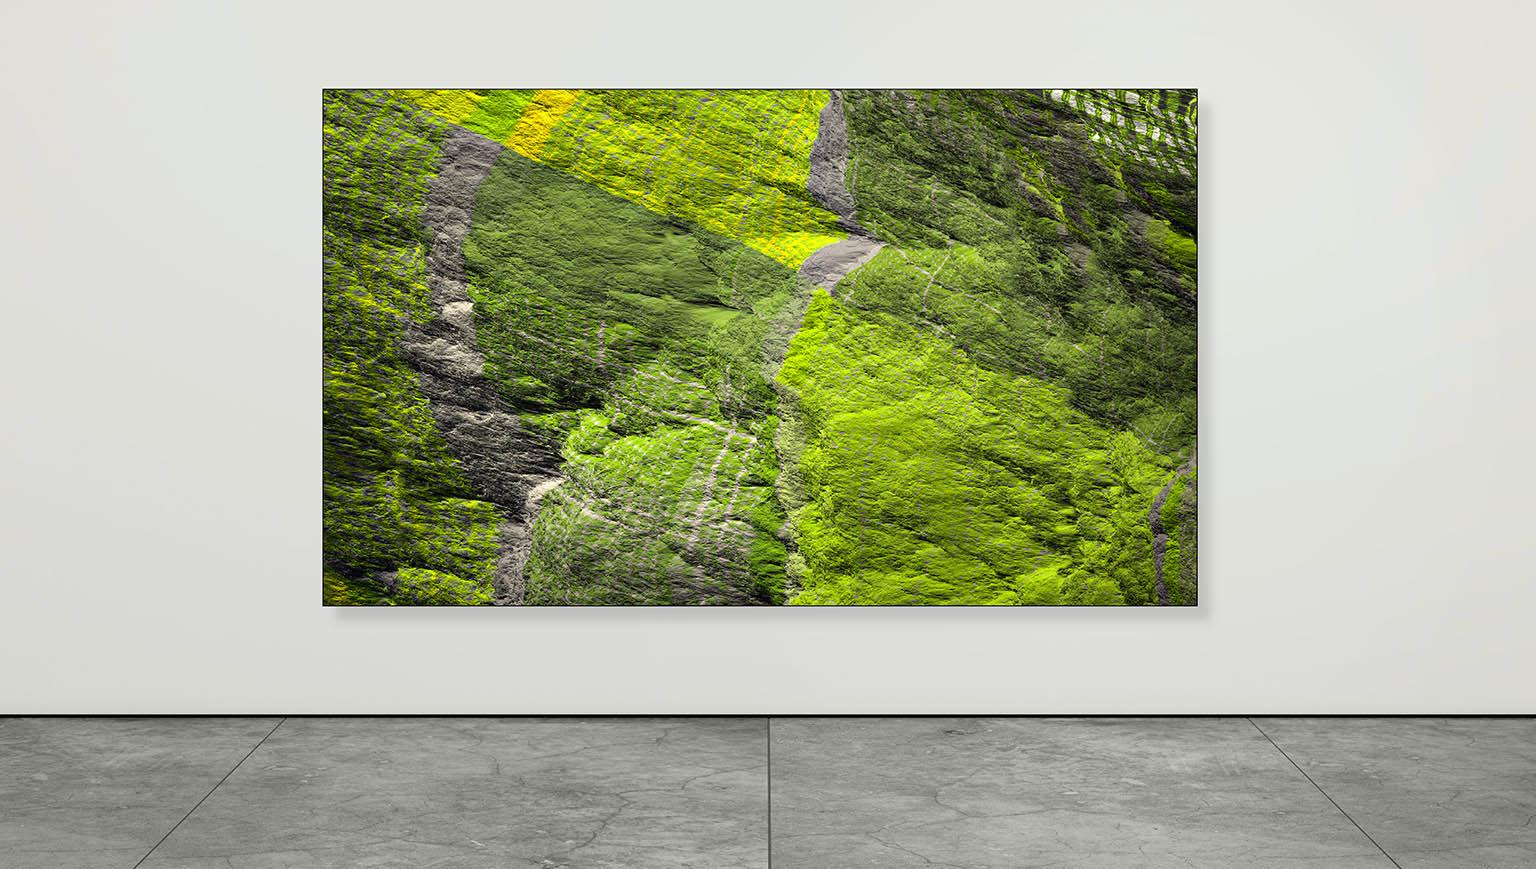 Digital Clift - Green Forest Aerial View - Contemporary Photograph by Paul-Émile Rioux